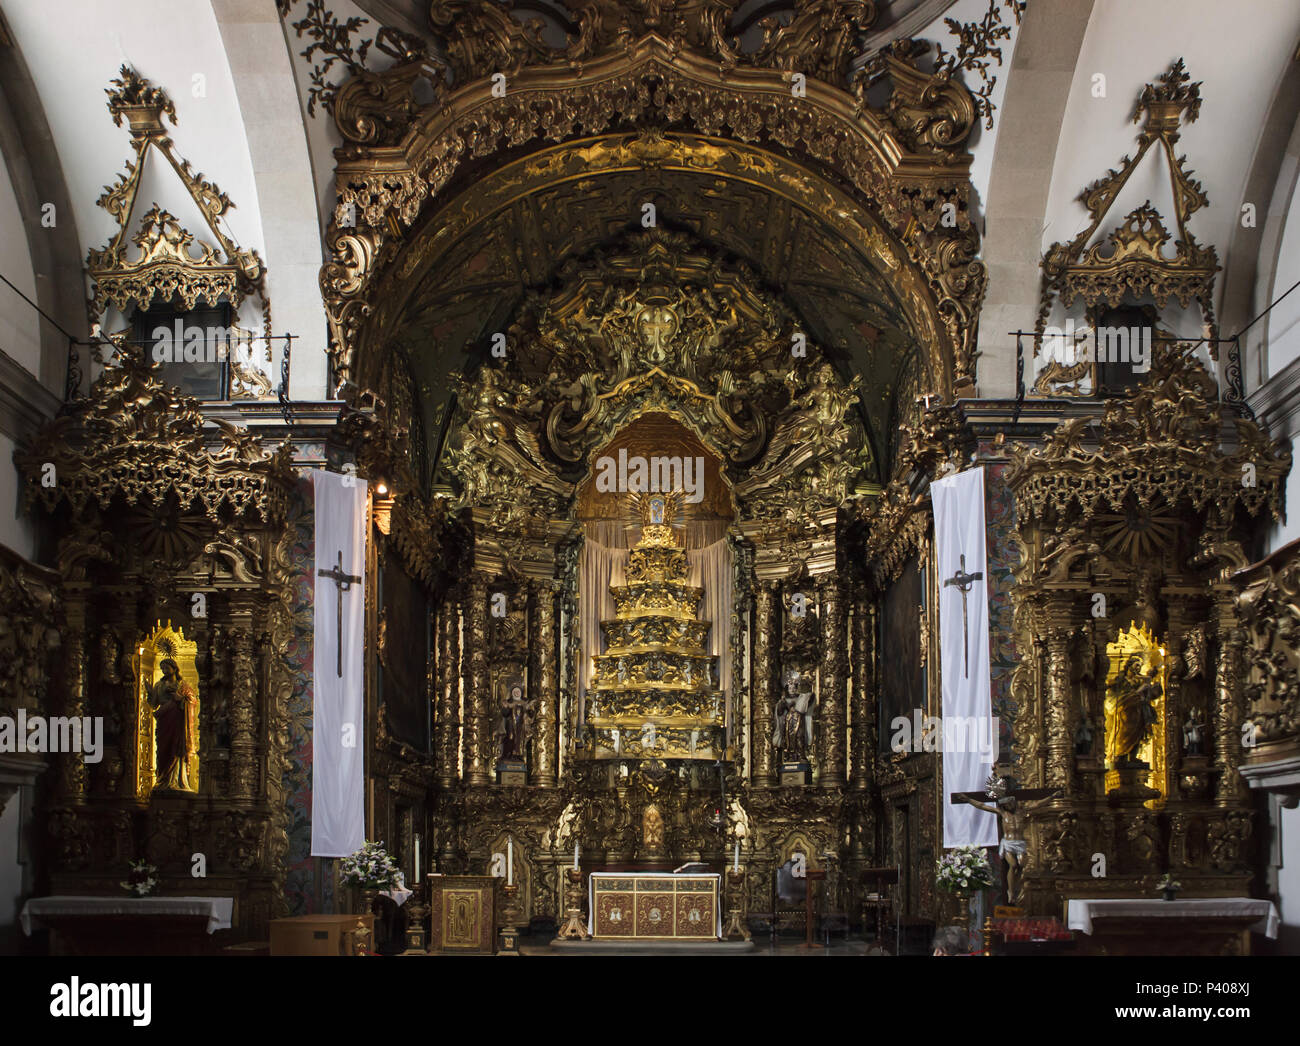 Interior of the Church of the Carmelites (Igreja dos Carmelitas) in Porto, Portugal. The church was built in the first half of the 17th century in Baroque style. Stock Photo